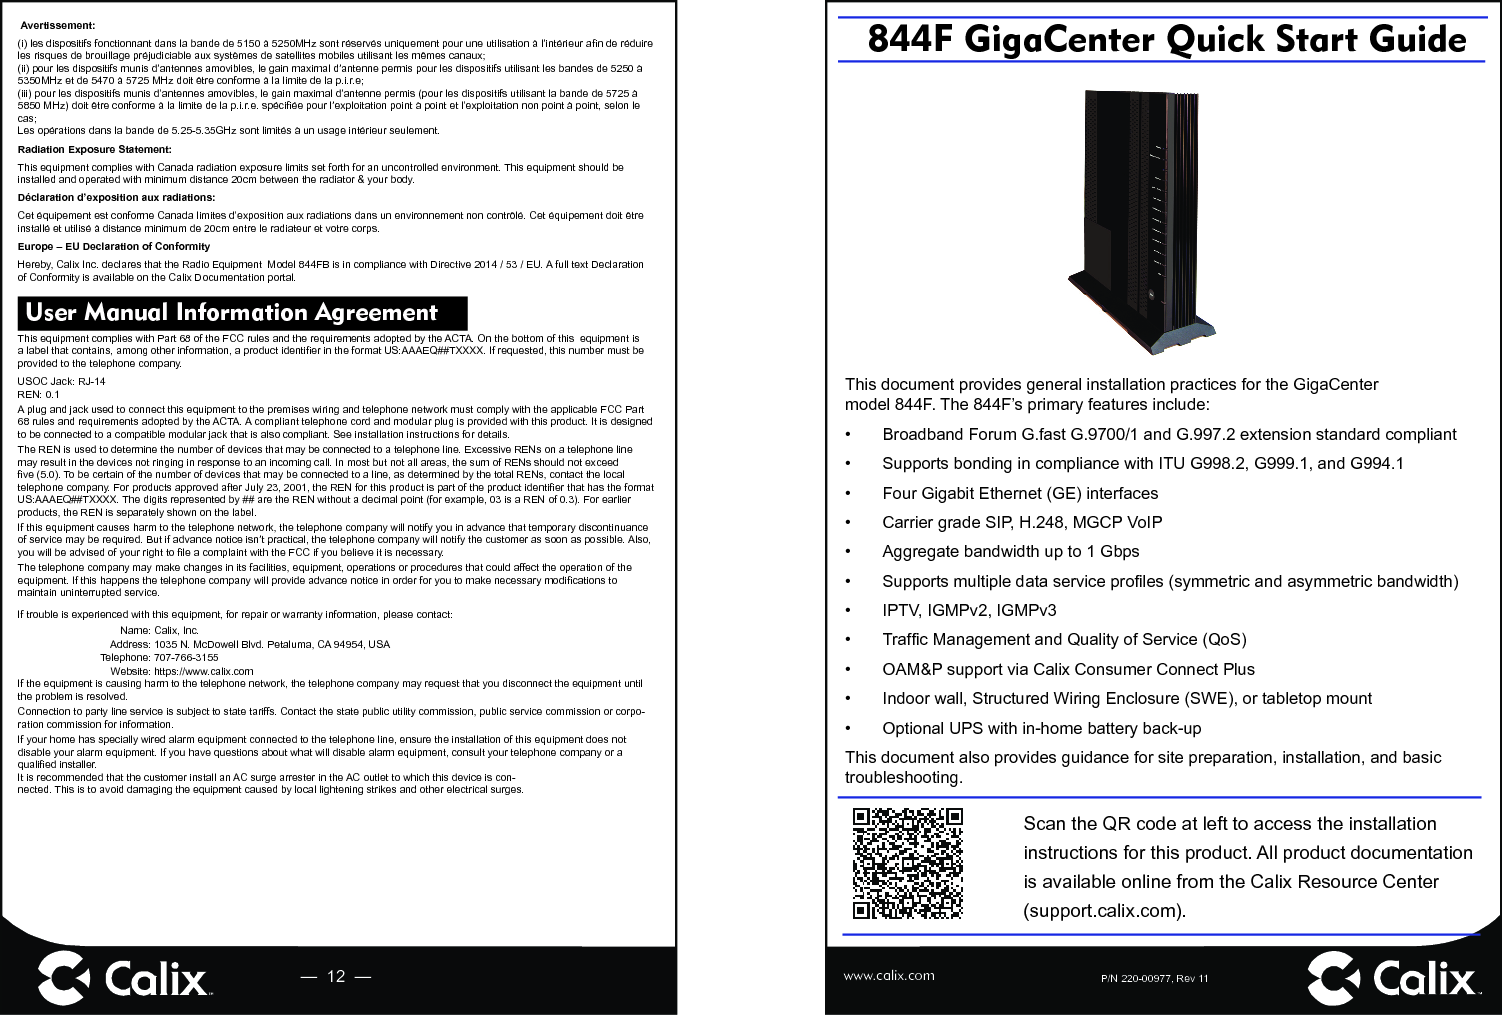 P/N 220-00977, Rev 11844F GigaCenter Quick Start Guide—  12  — www.calix.comThis document provides general installation practices for the GigaCenter model 844F. The 844F’s primary features include:•  Broadband Forum G.fast G.9700/1 and G.997.2 extension standard compliant•  Supports bonding in compliance with ITU G998.2, G999.1, and G994.1 •  Four Gigabit Ethernet (GE) interfaces•  Carrier grade SIP, H.248, MGCP VoIP•  Aggregate bandwidth up to 1 Gbps•  Supports multiple data service proﬁ les (symmetric and asymmetric bandwidth)•  IPTV, IGMPv2, IGMPv3 • Trafﬁ c Management and Quality of Service (QoS)•  OAM&amp;P support via Calix Consumer Connect Plus•  Indoor wall, Structured Wiring Enclosure (SWE), or tabletop mount•  Optional UPS with in-home battery back-up This document also provides guidance for site preparation, installation, and basic troubleshooting.Scan the QR code at left to access the installation instructions for this product. All product documentation is available online from the Calix Resource Center (support.calix.com).Avertissement:(i) les dispositifs fonctionnant dans la bande de 5150 à 5250MHz sont réservés uniquement pour une utilisation à l’intérieur aﬁ n de réduire les risques de brouillage préjudiciable aux systèmes de satellites mobiles utilisant les mêmes canaux;(ii) pour les dispositifs munis d’antennes amovibles, le gain maximal d’antenne permis pour les dispositifs utilisant les bandes de 5250 à 5350MHz et de 5470 à 5725 MHz doit être conforme à la limite de la p.i.r.e;(iii) pour les dispositifs munis d’antennes amovibles, le gain maximal d’antenne permis (pour les dispositifs utilisant la bande de 5725 à 5850 MHz) doit être conforme à la limite de la p.i.r.e. spéciﬁ ée pour l’exploitation point à point et l’exploitation non point à point, selon le cas;Les opérations dans la bande de 5.25-5.35GHz sont limités à un usage intérieur seulement.Radiation Exposure Statement:This equipment complies with Canada radiation exposure limits set forth for an uncontrolled environment. This equipment should be installed and operated with minimum distance 20cm between the radiator &amp; your body.Déclaration d’exposition aux radiations:Cet équipement est conforme Canada limites d’exposition aux radiations dans un environnement non contrôlé. Cet équipement doit être installé et utilisé à distance minimum de 20cm entre le radiateur et votre corps.Europe – EU Declaration of ConformityHereby, Calix Inc. declares that the Radio Equipment  Model 844FB is in compliance with Directive 2014 / 53 / EU. A full text Declaration of Conformity is available on the Calix Documentation portal. User Manual Information Agreement This equipment complies with Part 68 of the FCC rules and the requirements adopted by the ACTA. On the bottom of this  equipment is a label that contains, among other information, a product identiﬁ er in the format US:AAAEQ##TXXXX. If requested, this number must be provided to the telephone company.USOC Jack: RJ-14REN: 0.1A plug and jack used to connect this equipment to the premises wiring and telephone network must comply with the applicable FCC Part 68 rules and requirements adopted by the ACTA. A compliant telephone cord and modular plug is provided with this product. It is designed to be connected to a compatible modular jack that is also compliant. See installation instructions for details.The REN is used to determine the number of devices that may be connected to a telephone line. Excessive RENs on a telephone line may result in the devices not ringing in response to an incoming call. In most but not all areas, the sum of RENs should not exceed ﬁ ve (5.0). To be certain of the number of devices that may be connected to a line, as determined by the total RENs, contact the local telephone company. For products approved after July 23, 2001, the REN for this product is part of the product identiﬁ er that has the format US:AAAEQ##TXXXX. The digits represented by ## are the REN without a decimal point (for example, 03 is a REN of 0.3). For earlier products, the REN is separately shown on the label.If this equipment causes harm to the telephone network, the telephone company will notify you in advance that temporary discontinuance of service may be required. But if advance notice isn’t practical, the telephone company will notify the customer as soon as possible. Also, you will be advised of your right to ﬁ le a complaint with the FCC if you believe it is necessary.The telephone company may make changes in its facilities, equipment, operations or procedures that could affect the operation of the equipment. If this happens the telephone company will provide advance notice in order for you to make necessary modiﬁ cations to maintain uninterrupted service.If trouble is experienced with this equipment, for repair or warranty information, please contact:Name: Calix, Inc.Address: 1035 N. McDowell Blvd. Petaluma, CA 94954, USATelephone: 707-766-3155Website: https://www.calix.comIf the equipment is causing harm to the telephone network, the telephone company may request that you disconnect the equipment until the problem is resolved.Connection to party line service is subject to state tariffs. Contact the state public utility commission, public service commission or corpo-ration commission for information.If your home has specially wired alarm equipment connected to the telephone line, ensure the installation of this equipment does not disable your alarm equipment. If you have questions about what will disable alarm equipment, consult your telephone company or a qualiﬁ ed installer.It is recommended that the customer install an AC surge arrester in the AC outlet to which this device is con-nected. This is to avoid damaging the equipment caused by local lightening strikes and other electrical surges. 